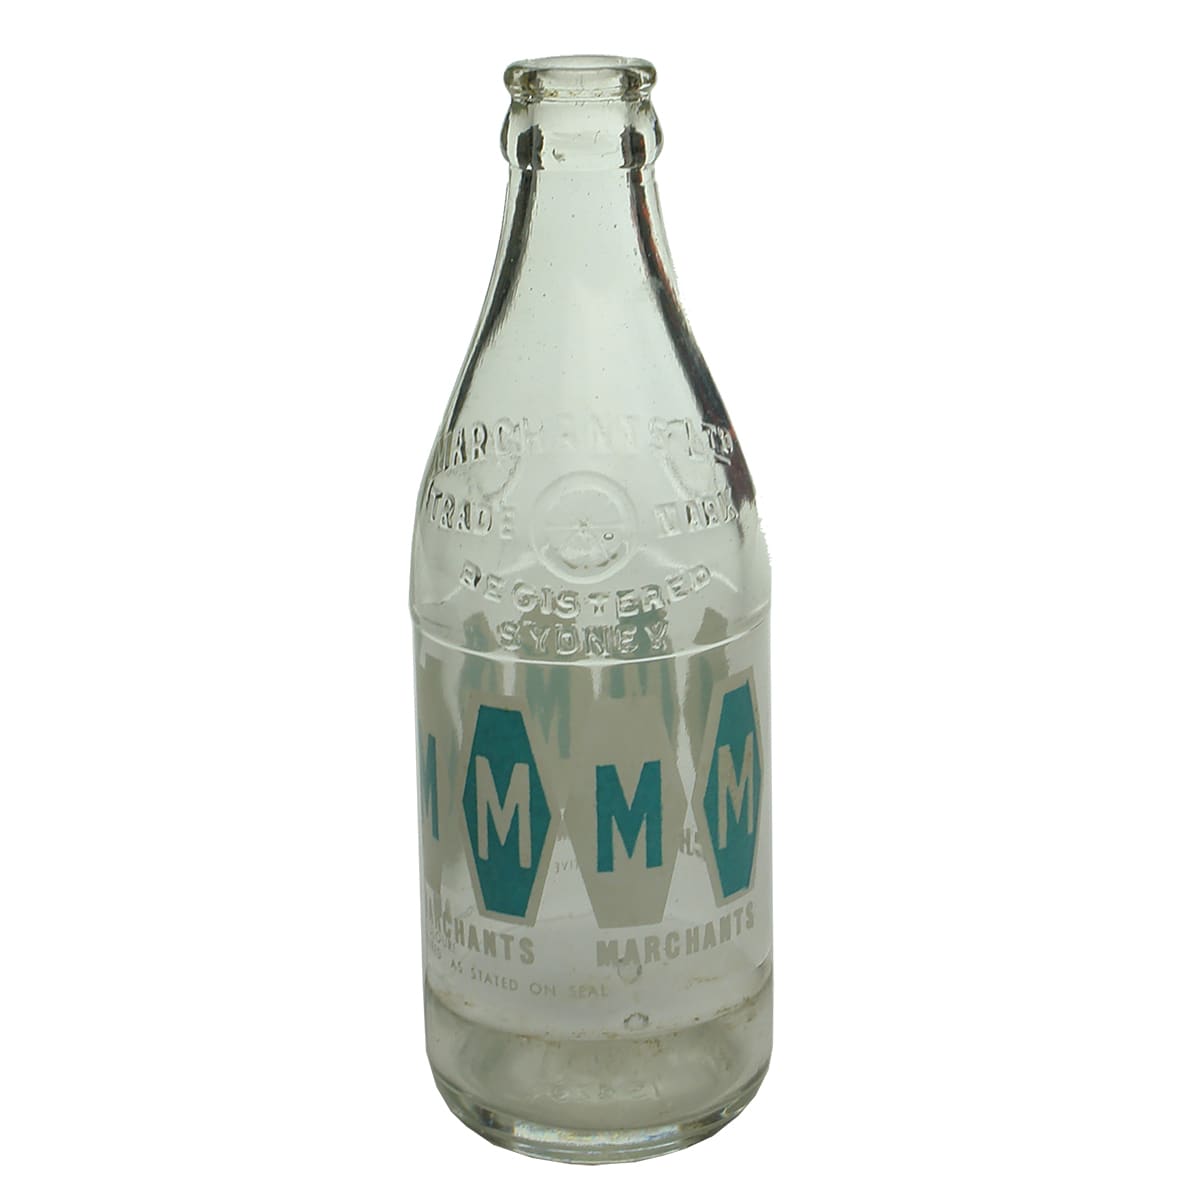 Ceramic Label Crown Seal. Marchants, Sydney. Aqua & White Hexagons. Embossed Shoulder. Clear. 10 oz. (New South Wales)